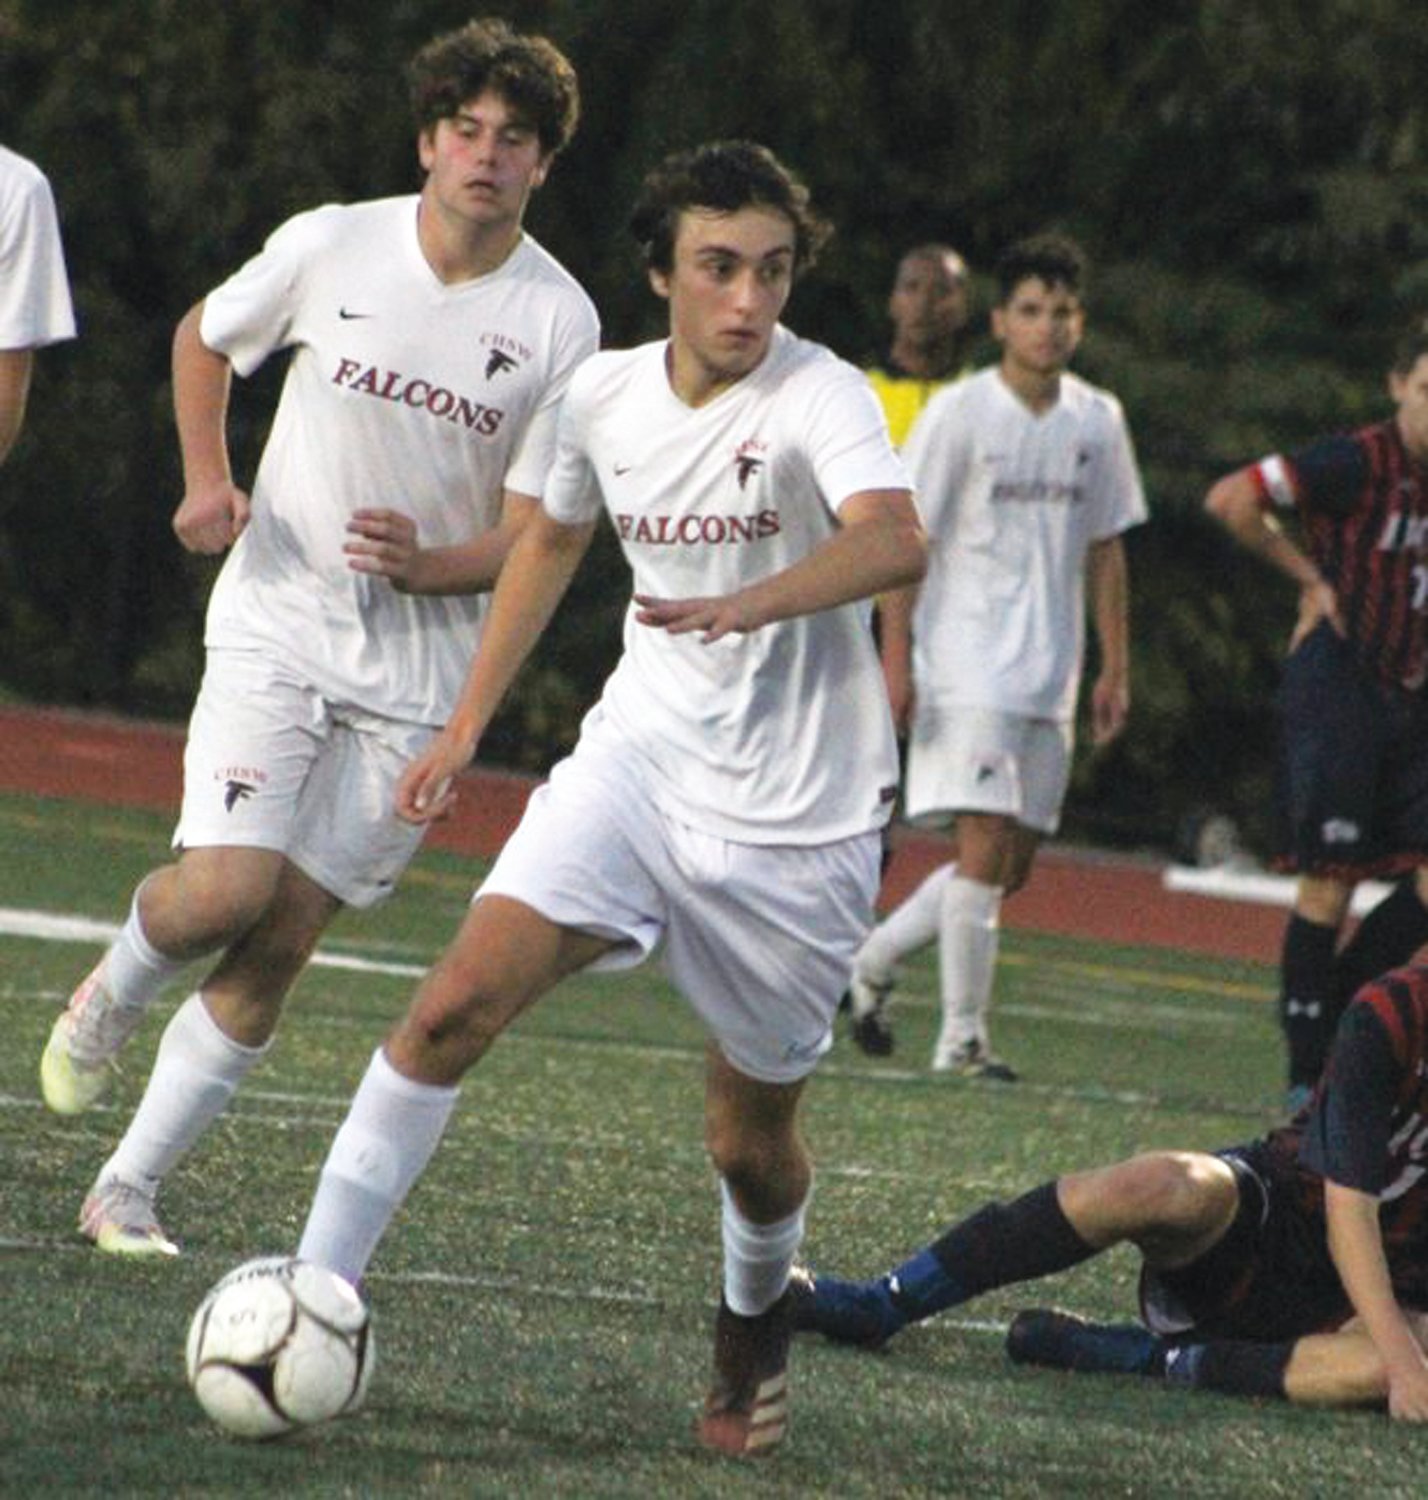 The Cranston West boys soccer team handed Lincoln its first loss of the season to make a statement.